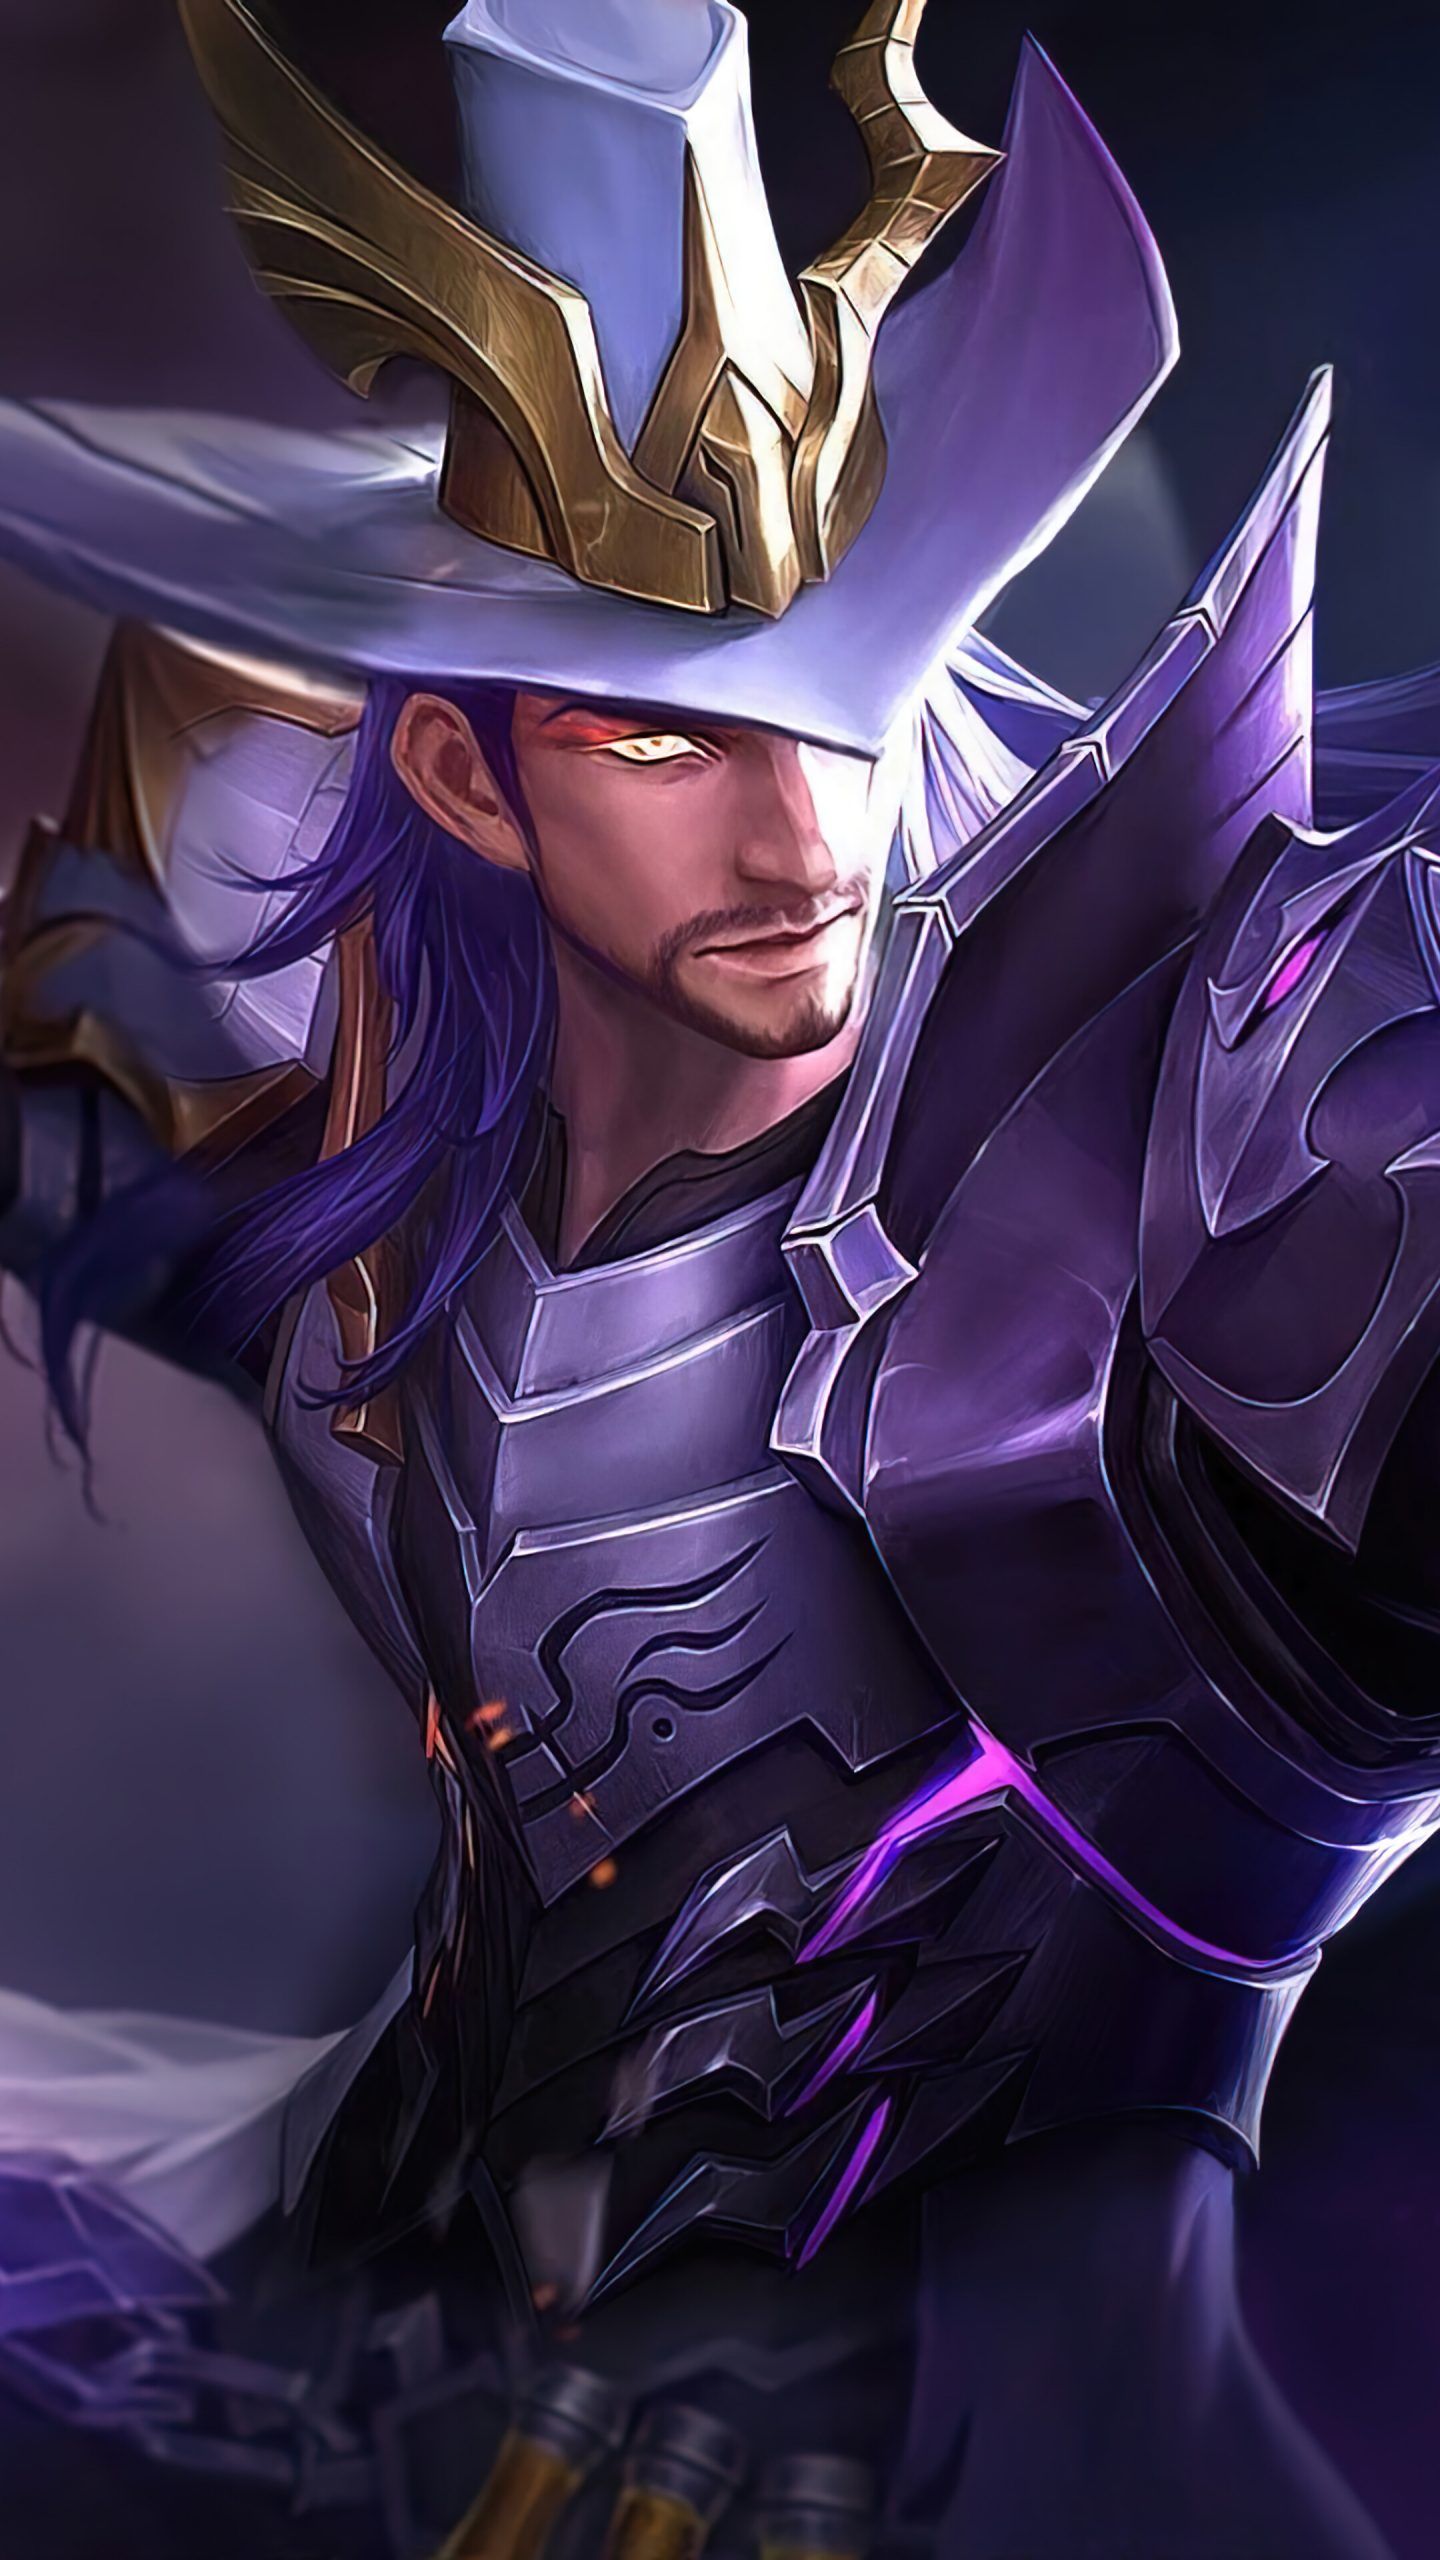 Wallpaper HD Clint Skin Edition Mobile Legends For PC and Phone